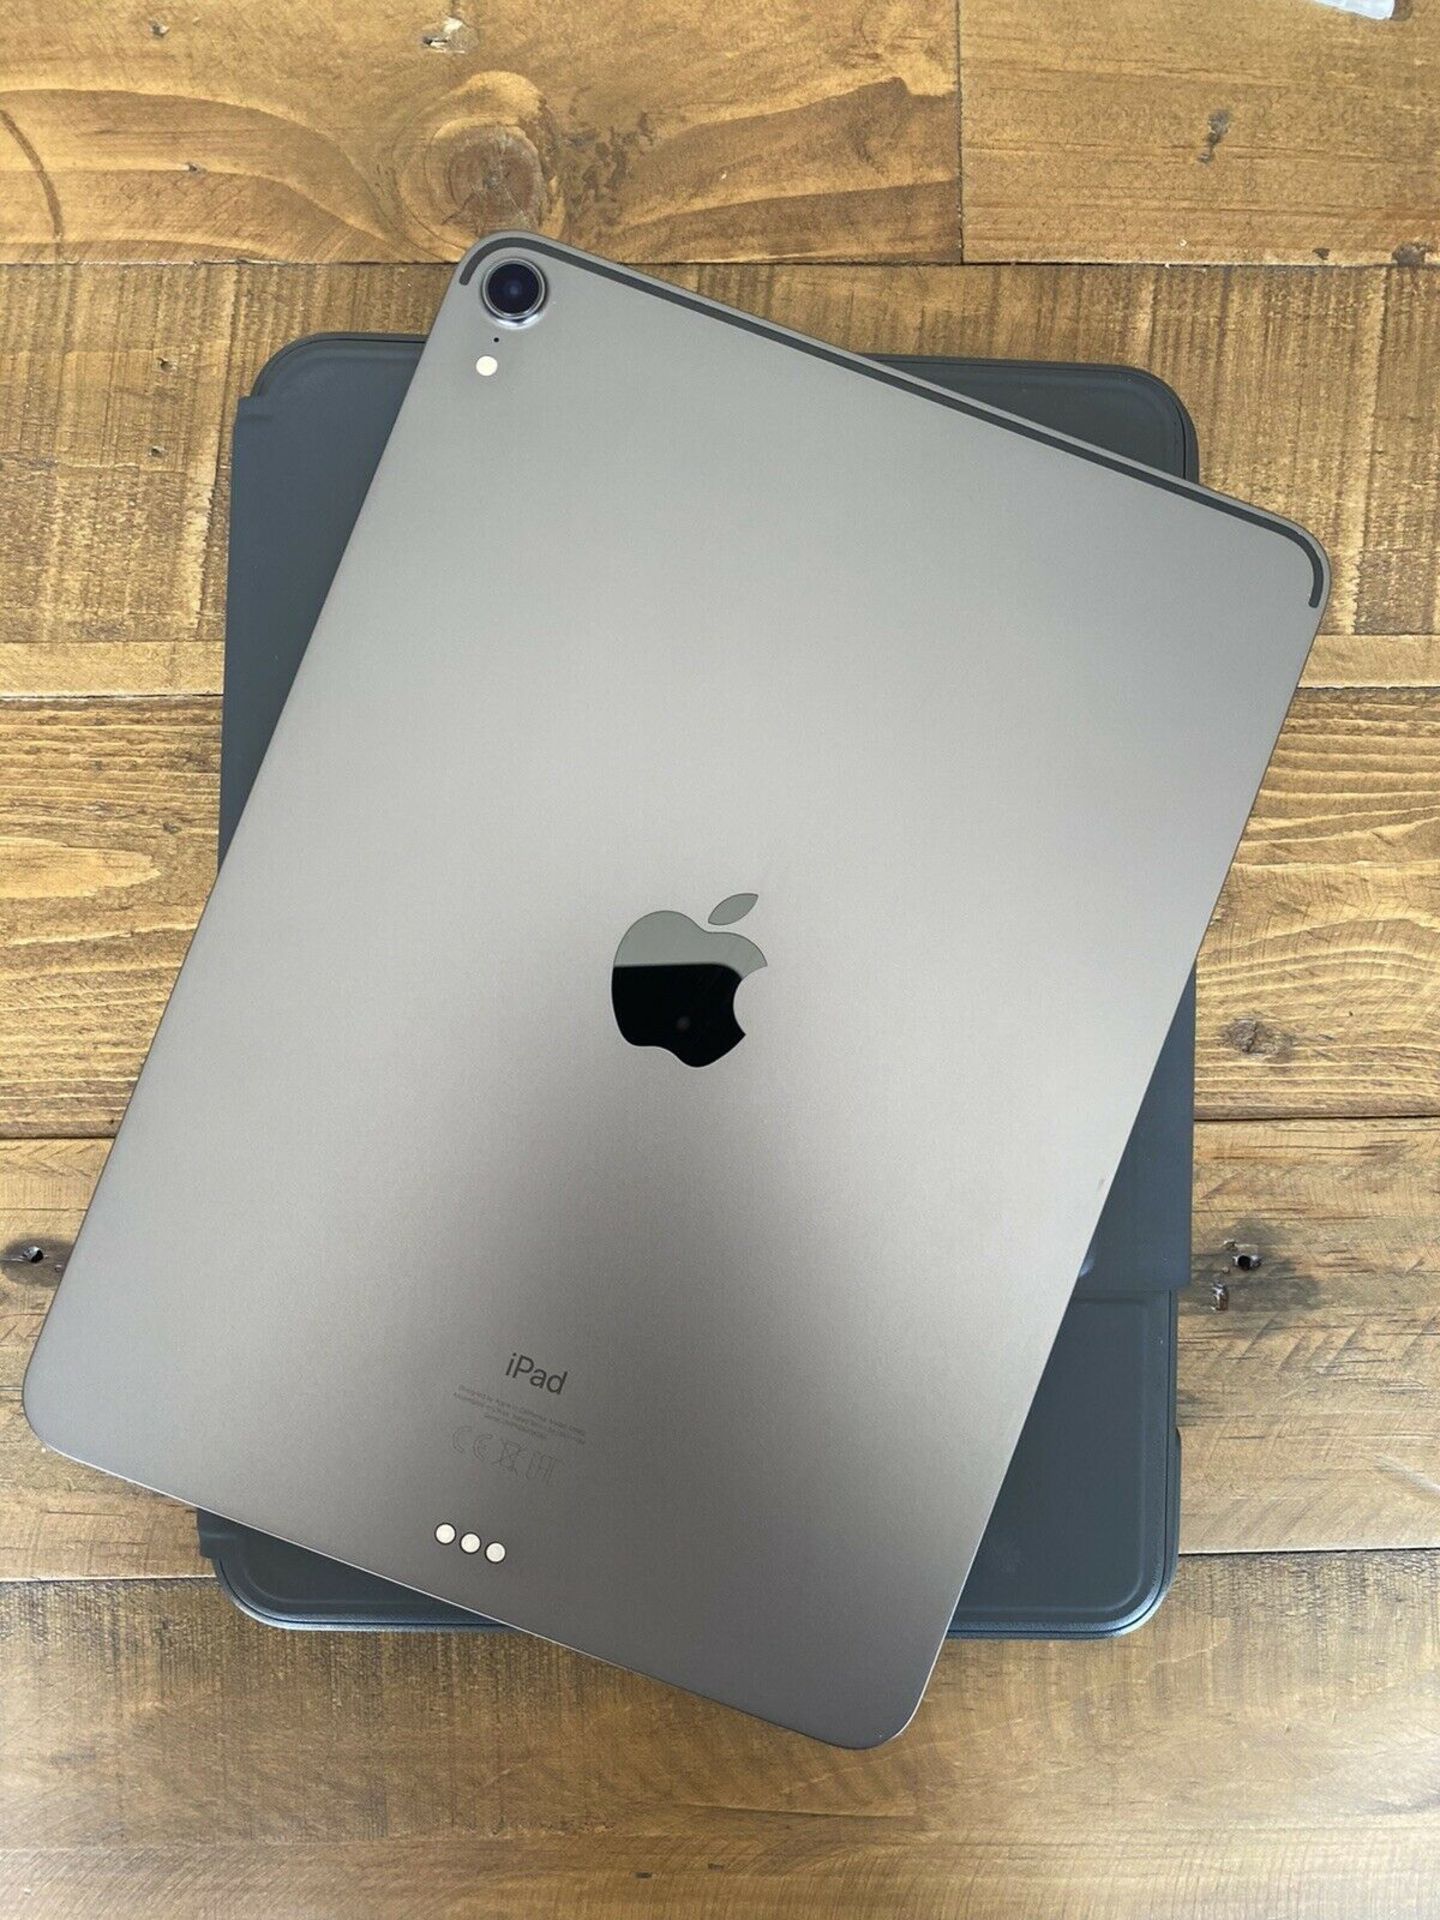 GREAT CONDITION! APPLE IPAD PRO 11-INCH (2018 MODEL) 64GB WIFI & CELLULAR - UNLOCKED! GREY + EXTRAS! - Image 4 of 9